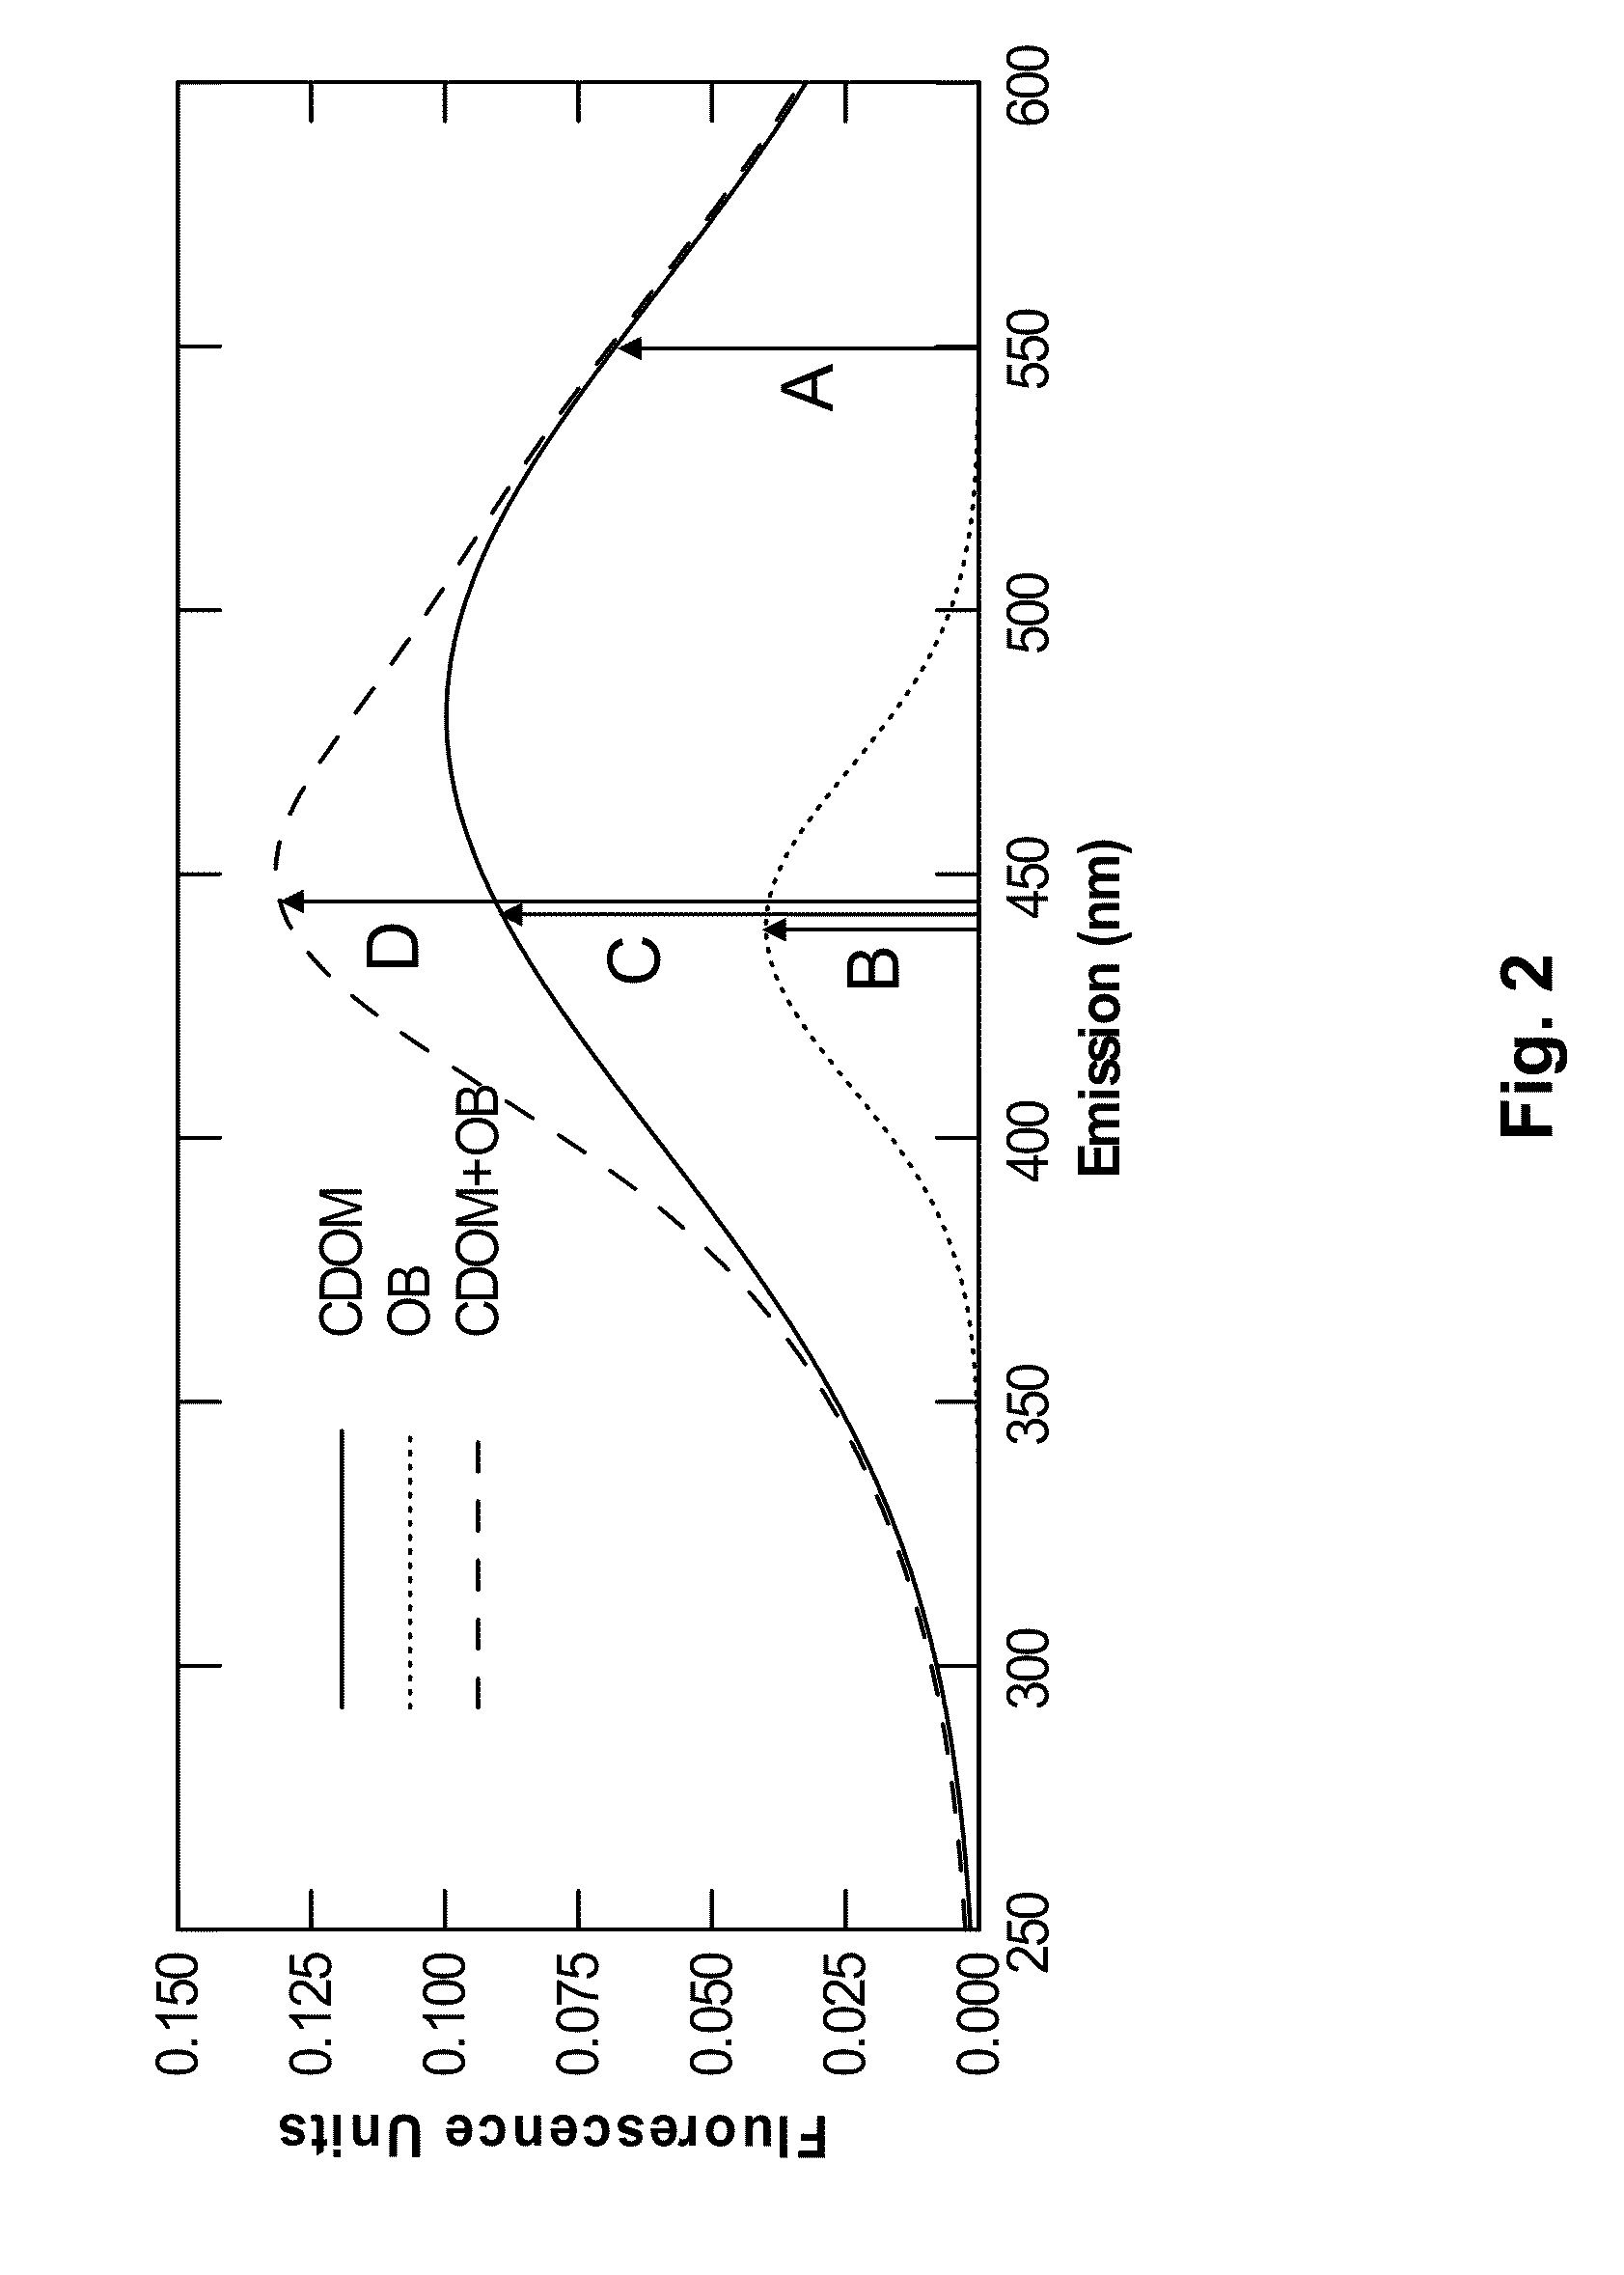 Method and apparatus for determining the presence of optical brighteners in water samples